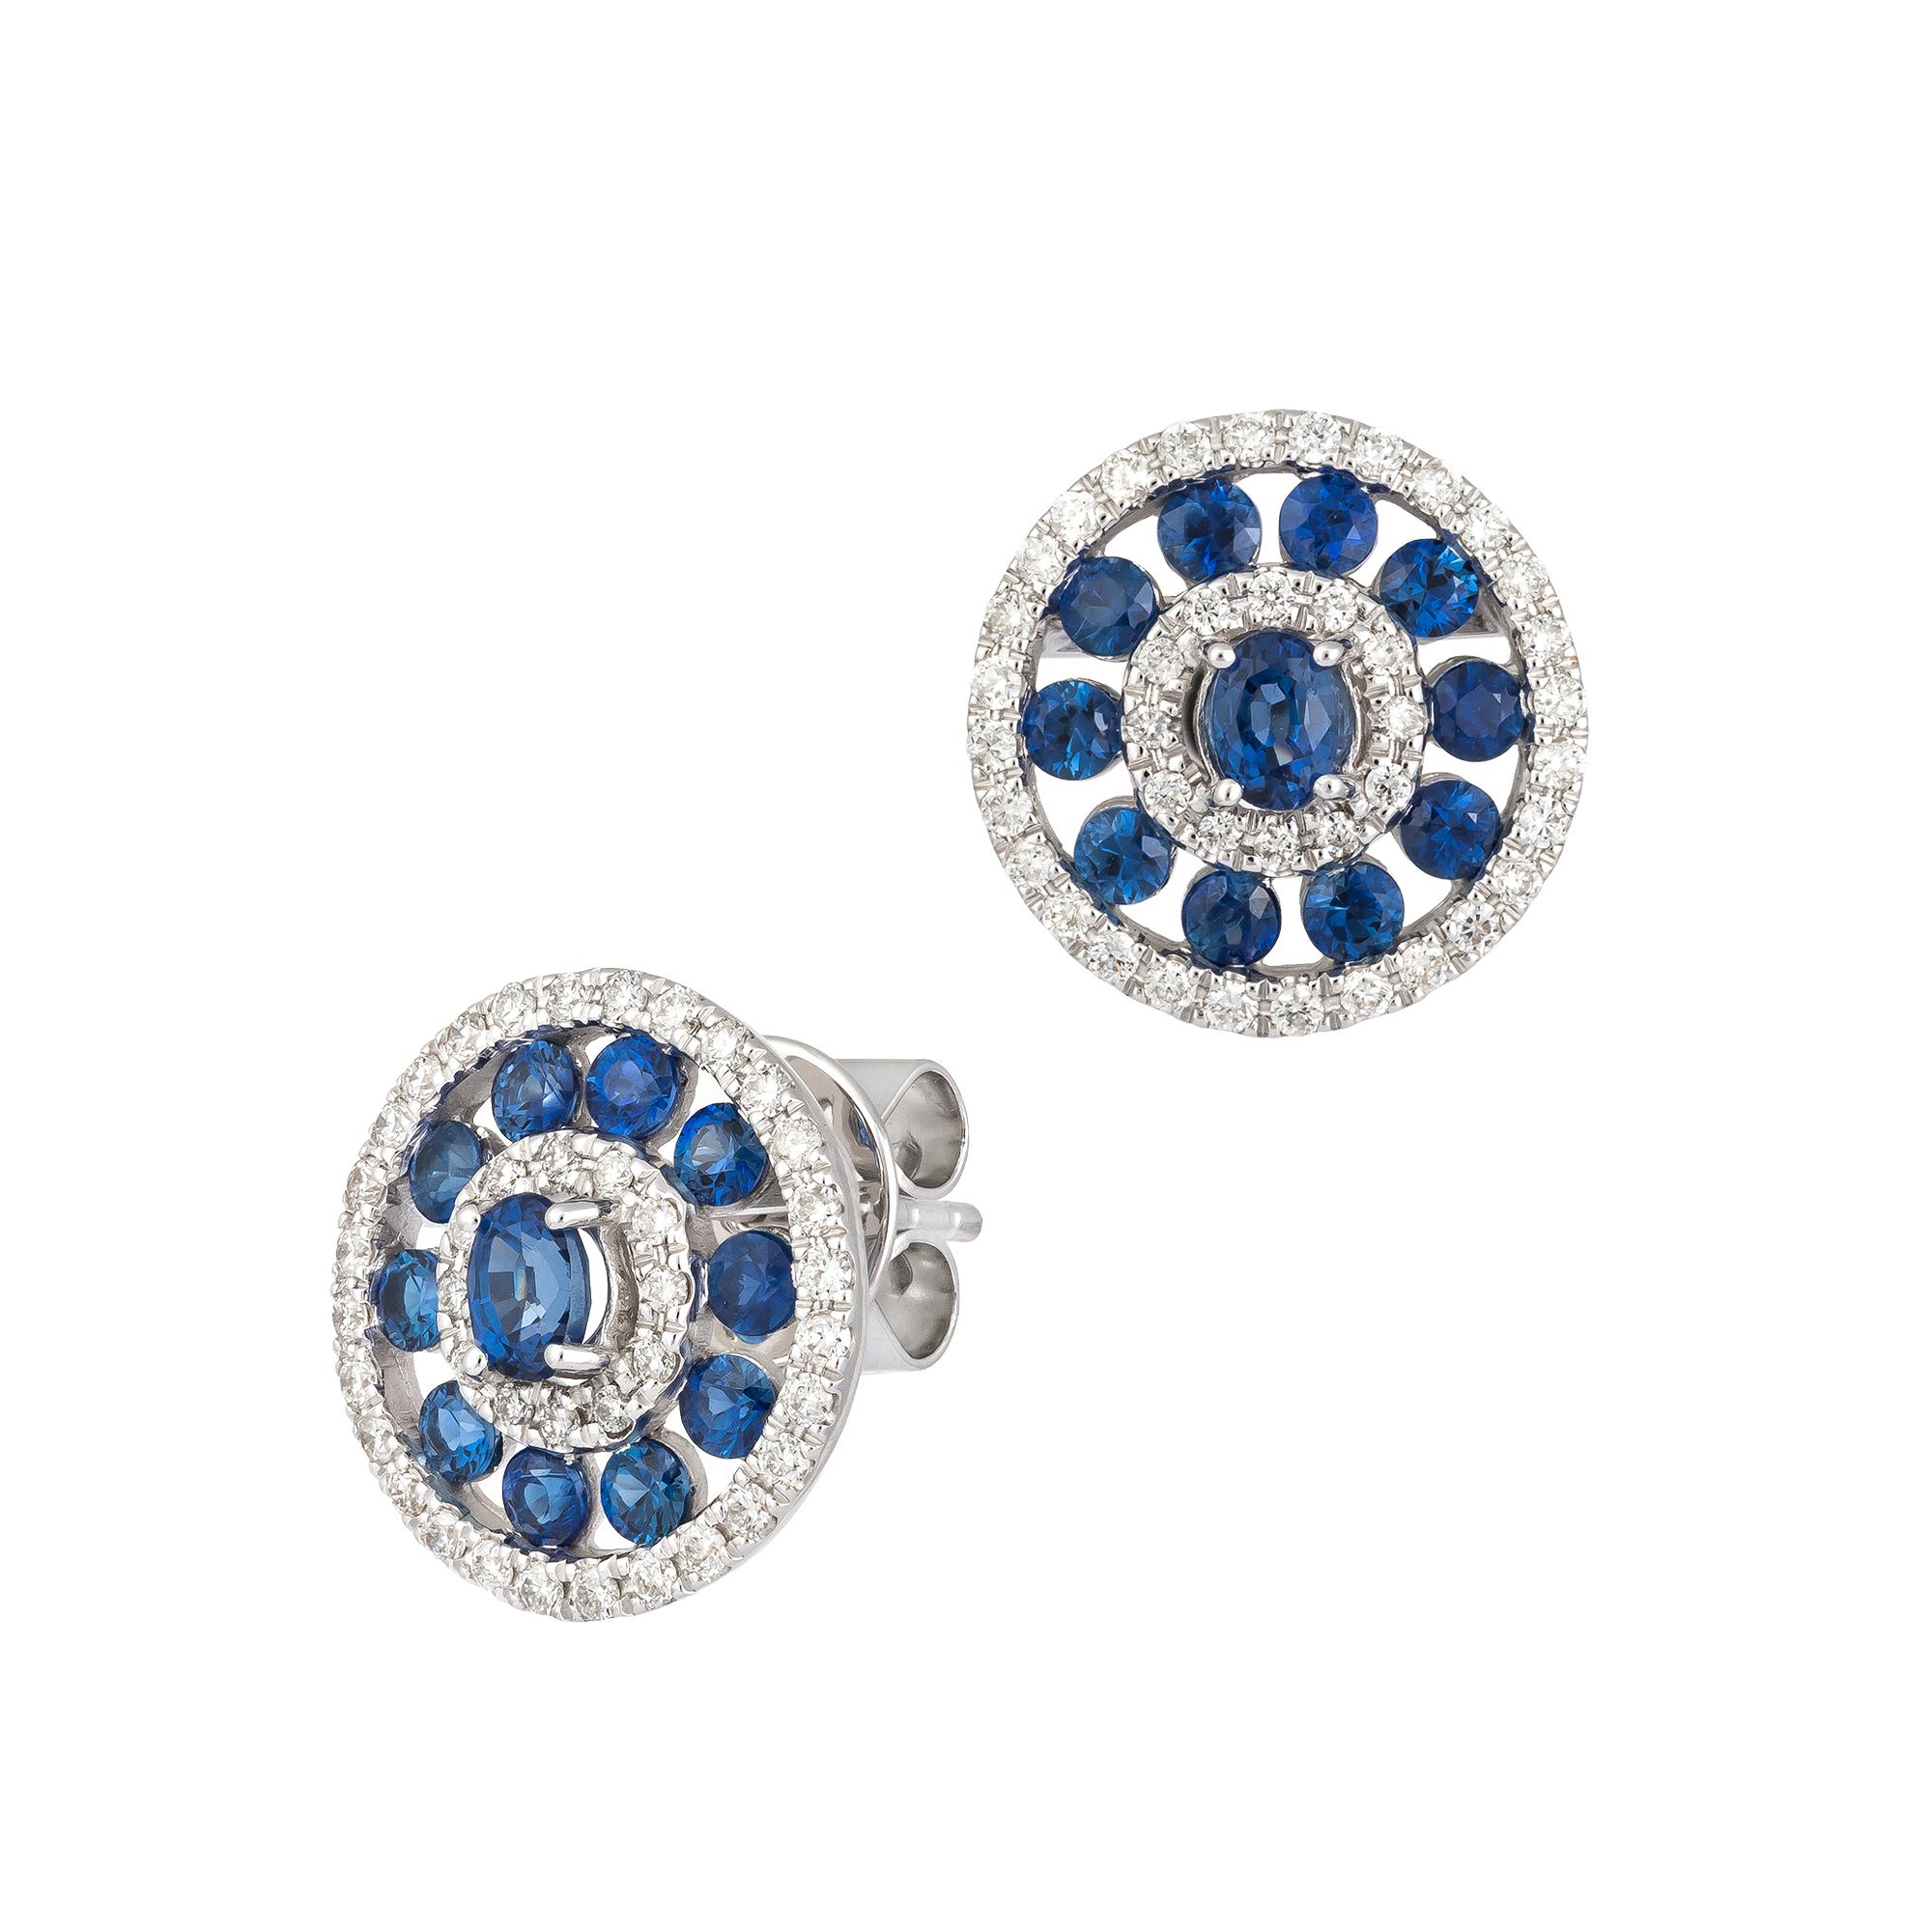 EARRING 18K White Gold Blue Sapphire 1.39 Cts/22 Pieces, D 0.40 Cts/80 Pieces
